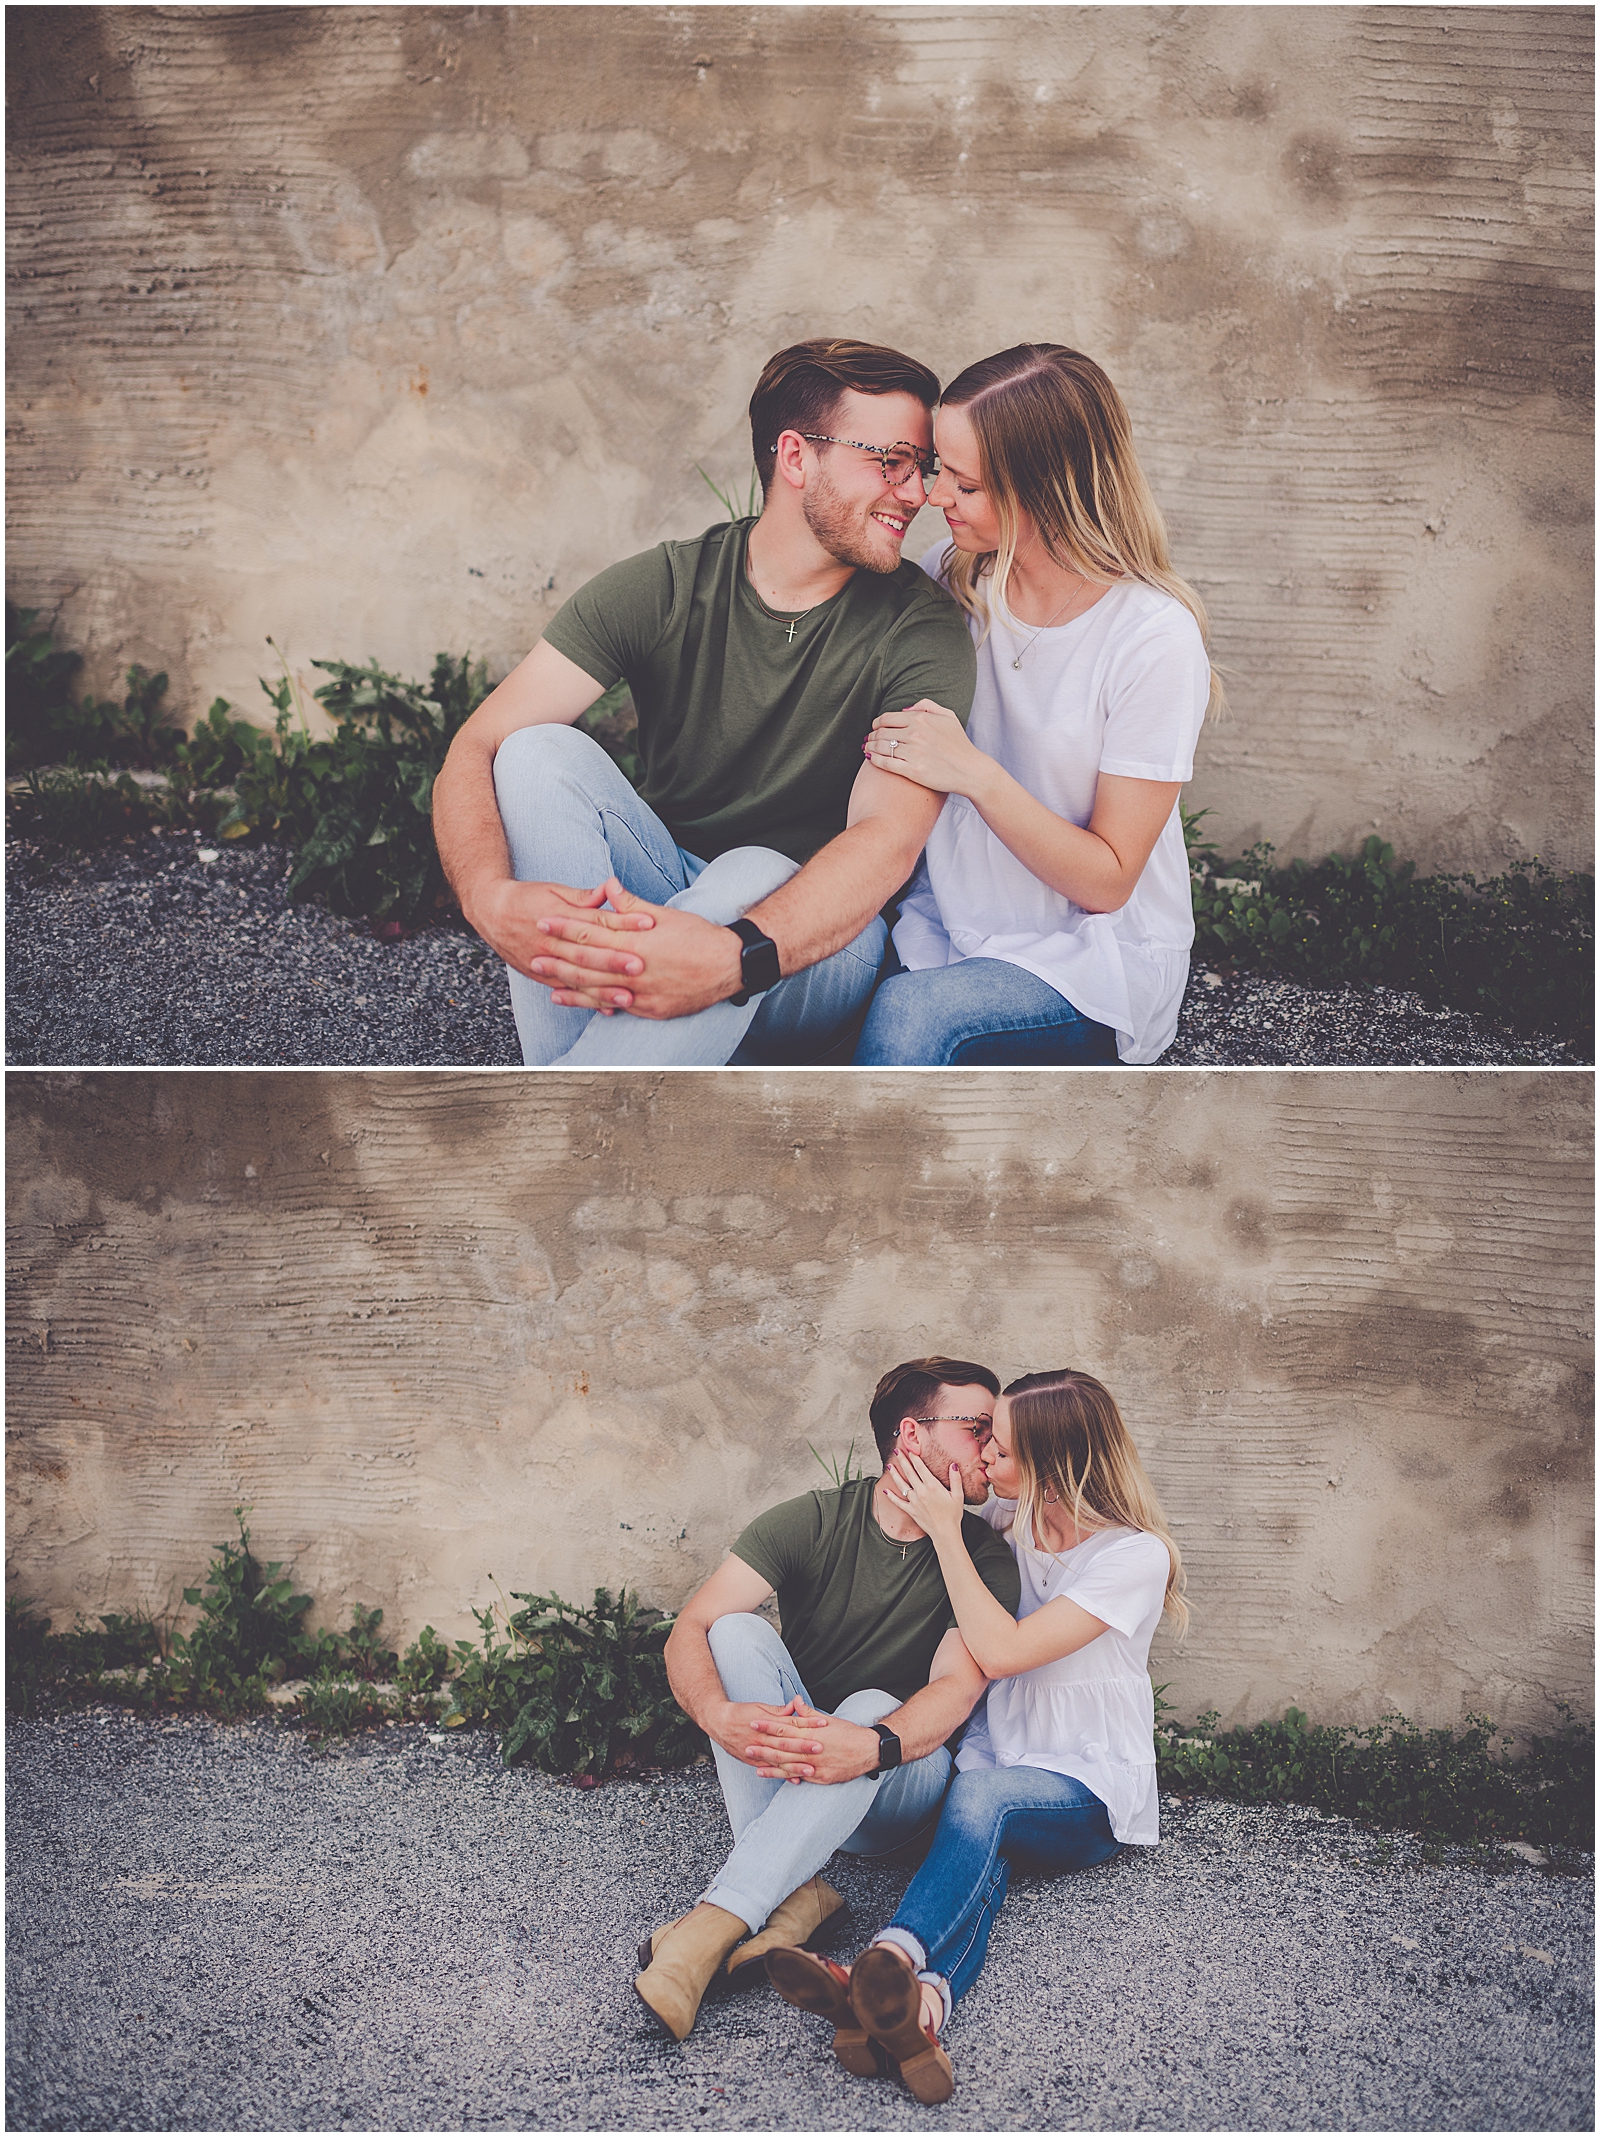 Lauren and Chase's Downtown Kankakee engagement photos in Kankakee, Illinois with Chicagoland wedding photographer Kara Evans Photographer.